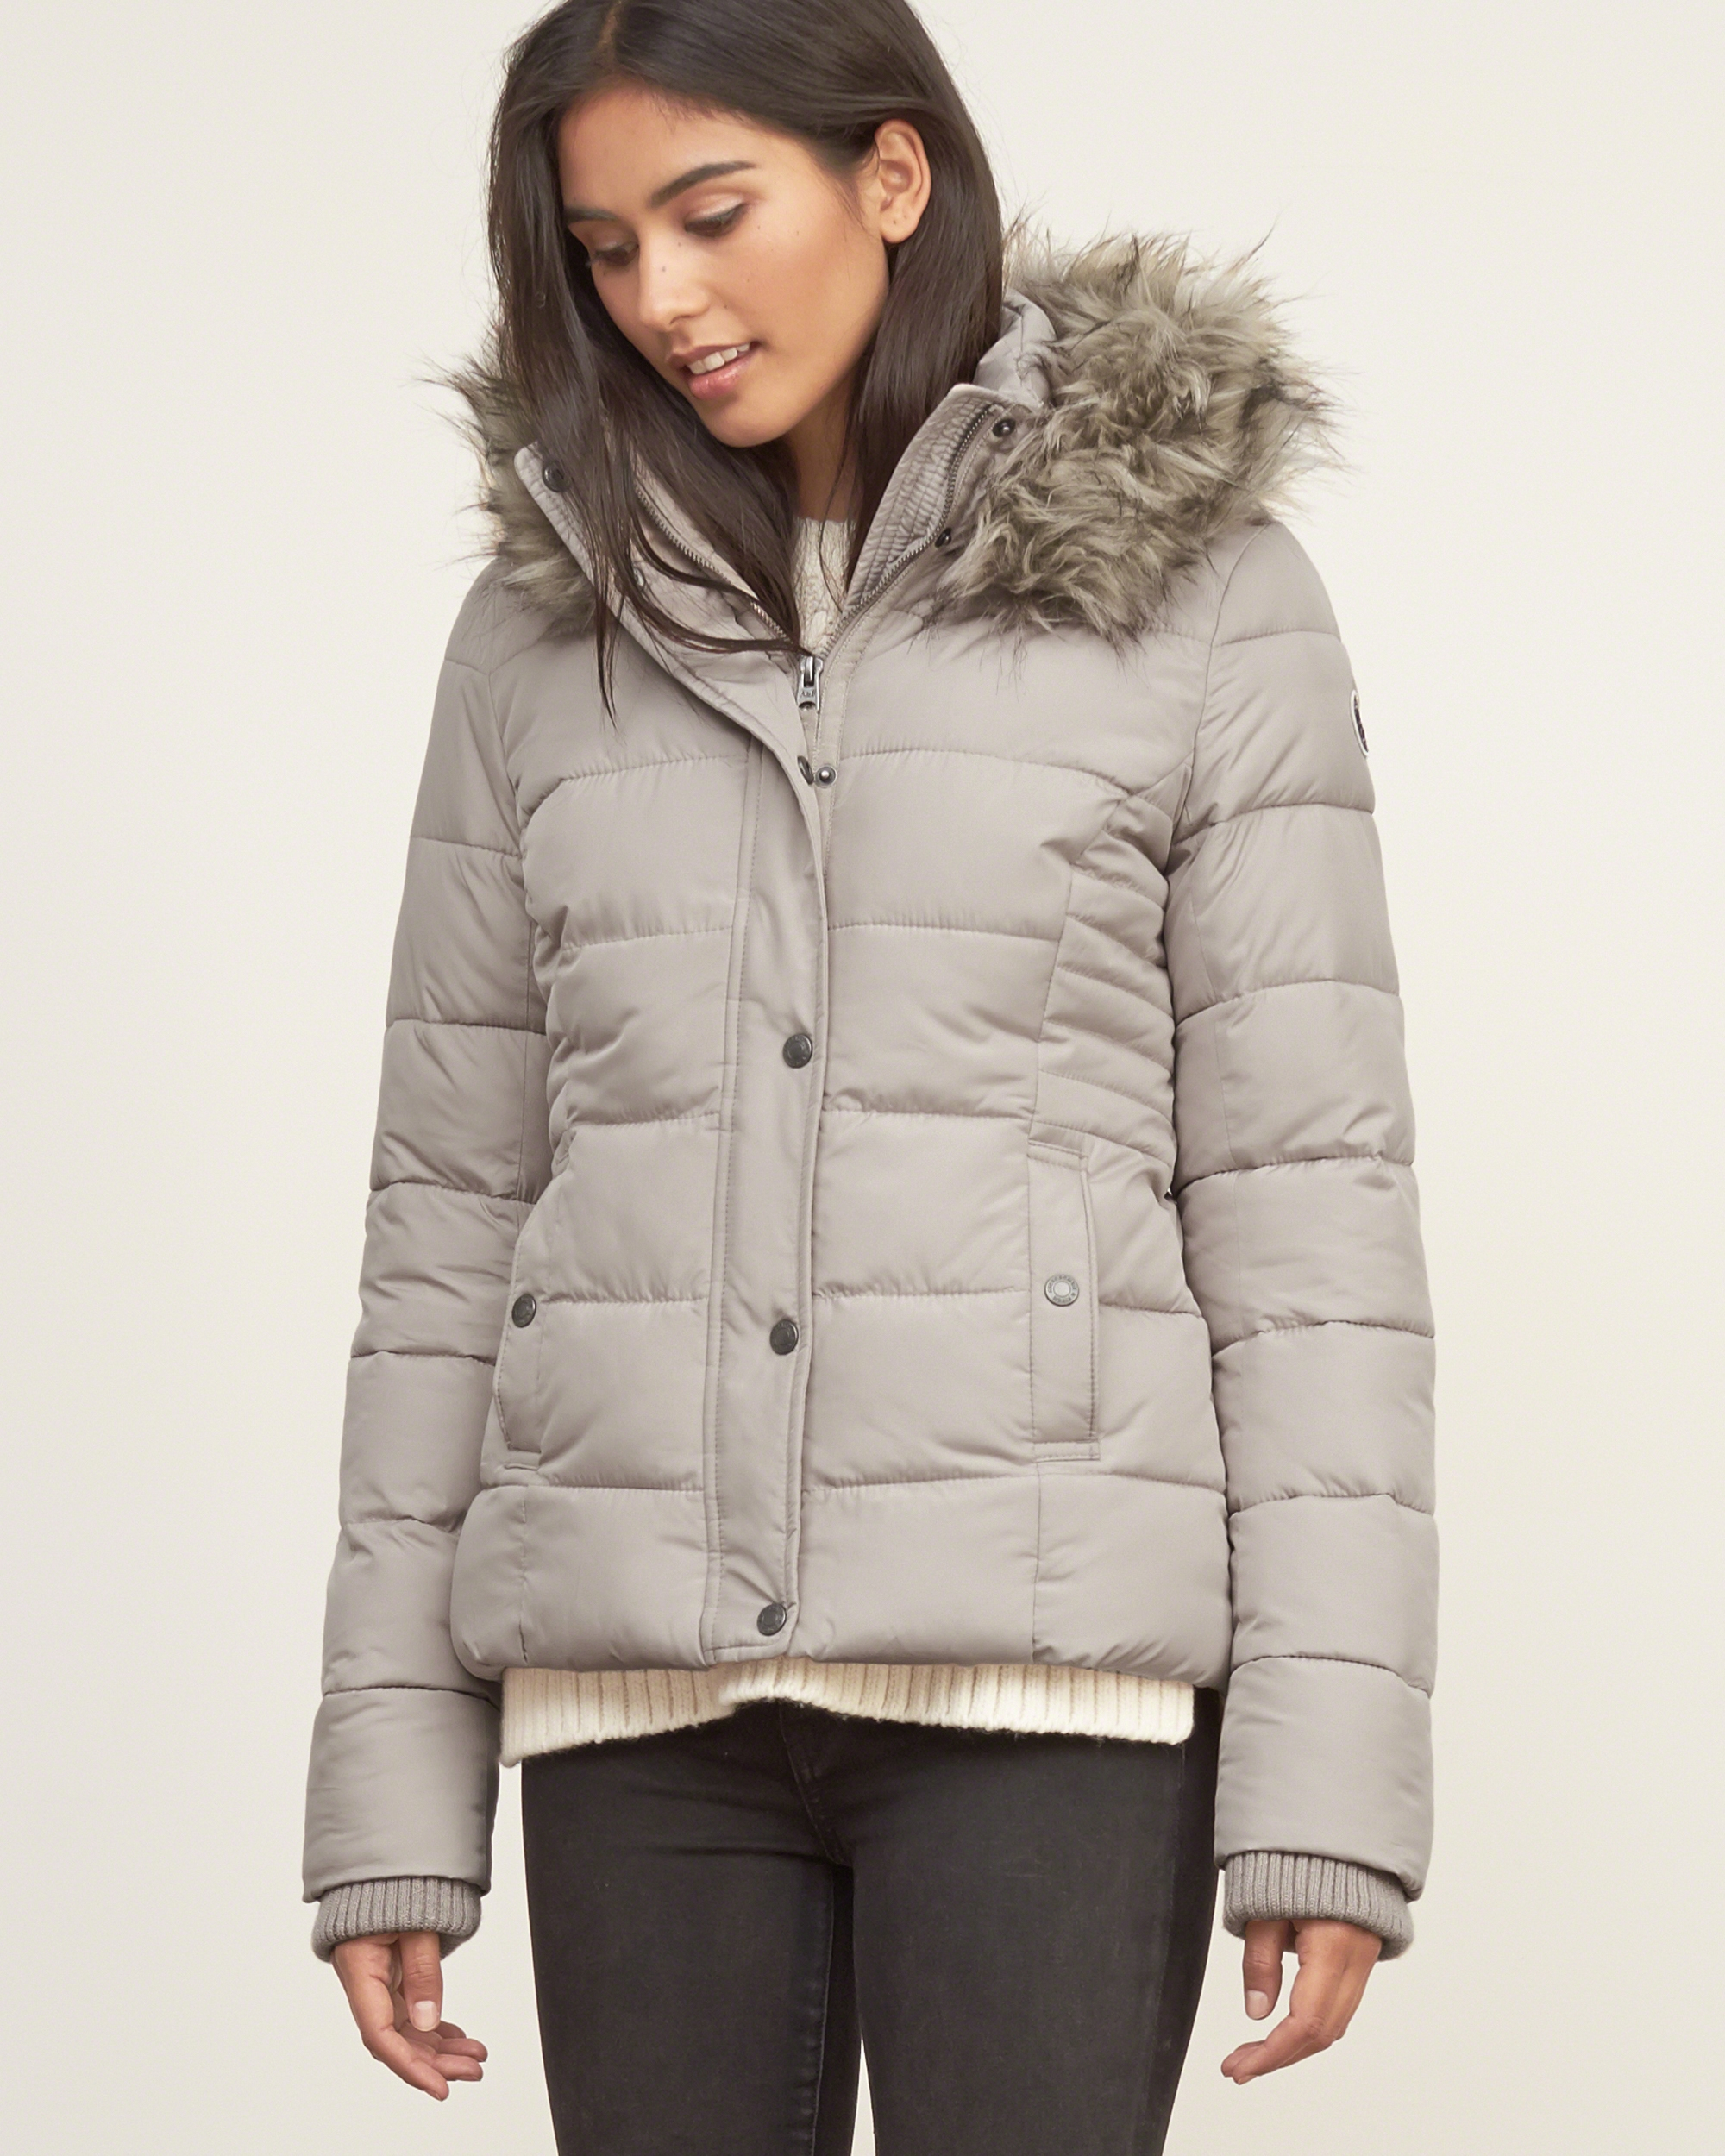 Lyst - Abercrombie & Fitch A&f Premium Puffer Jacket